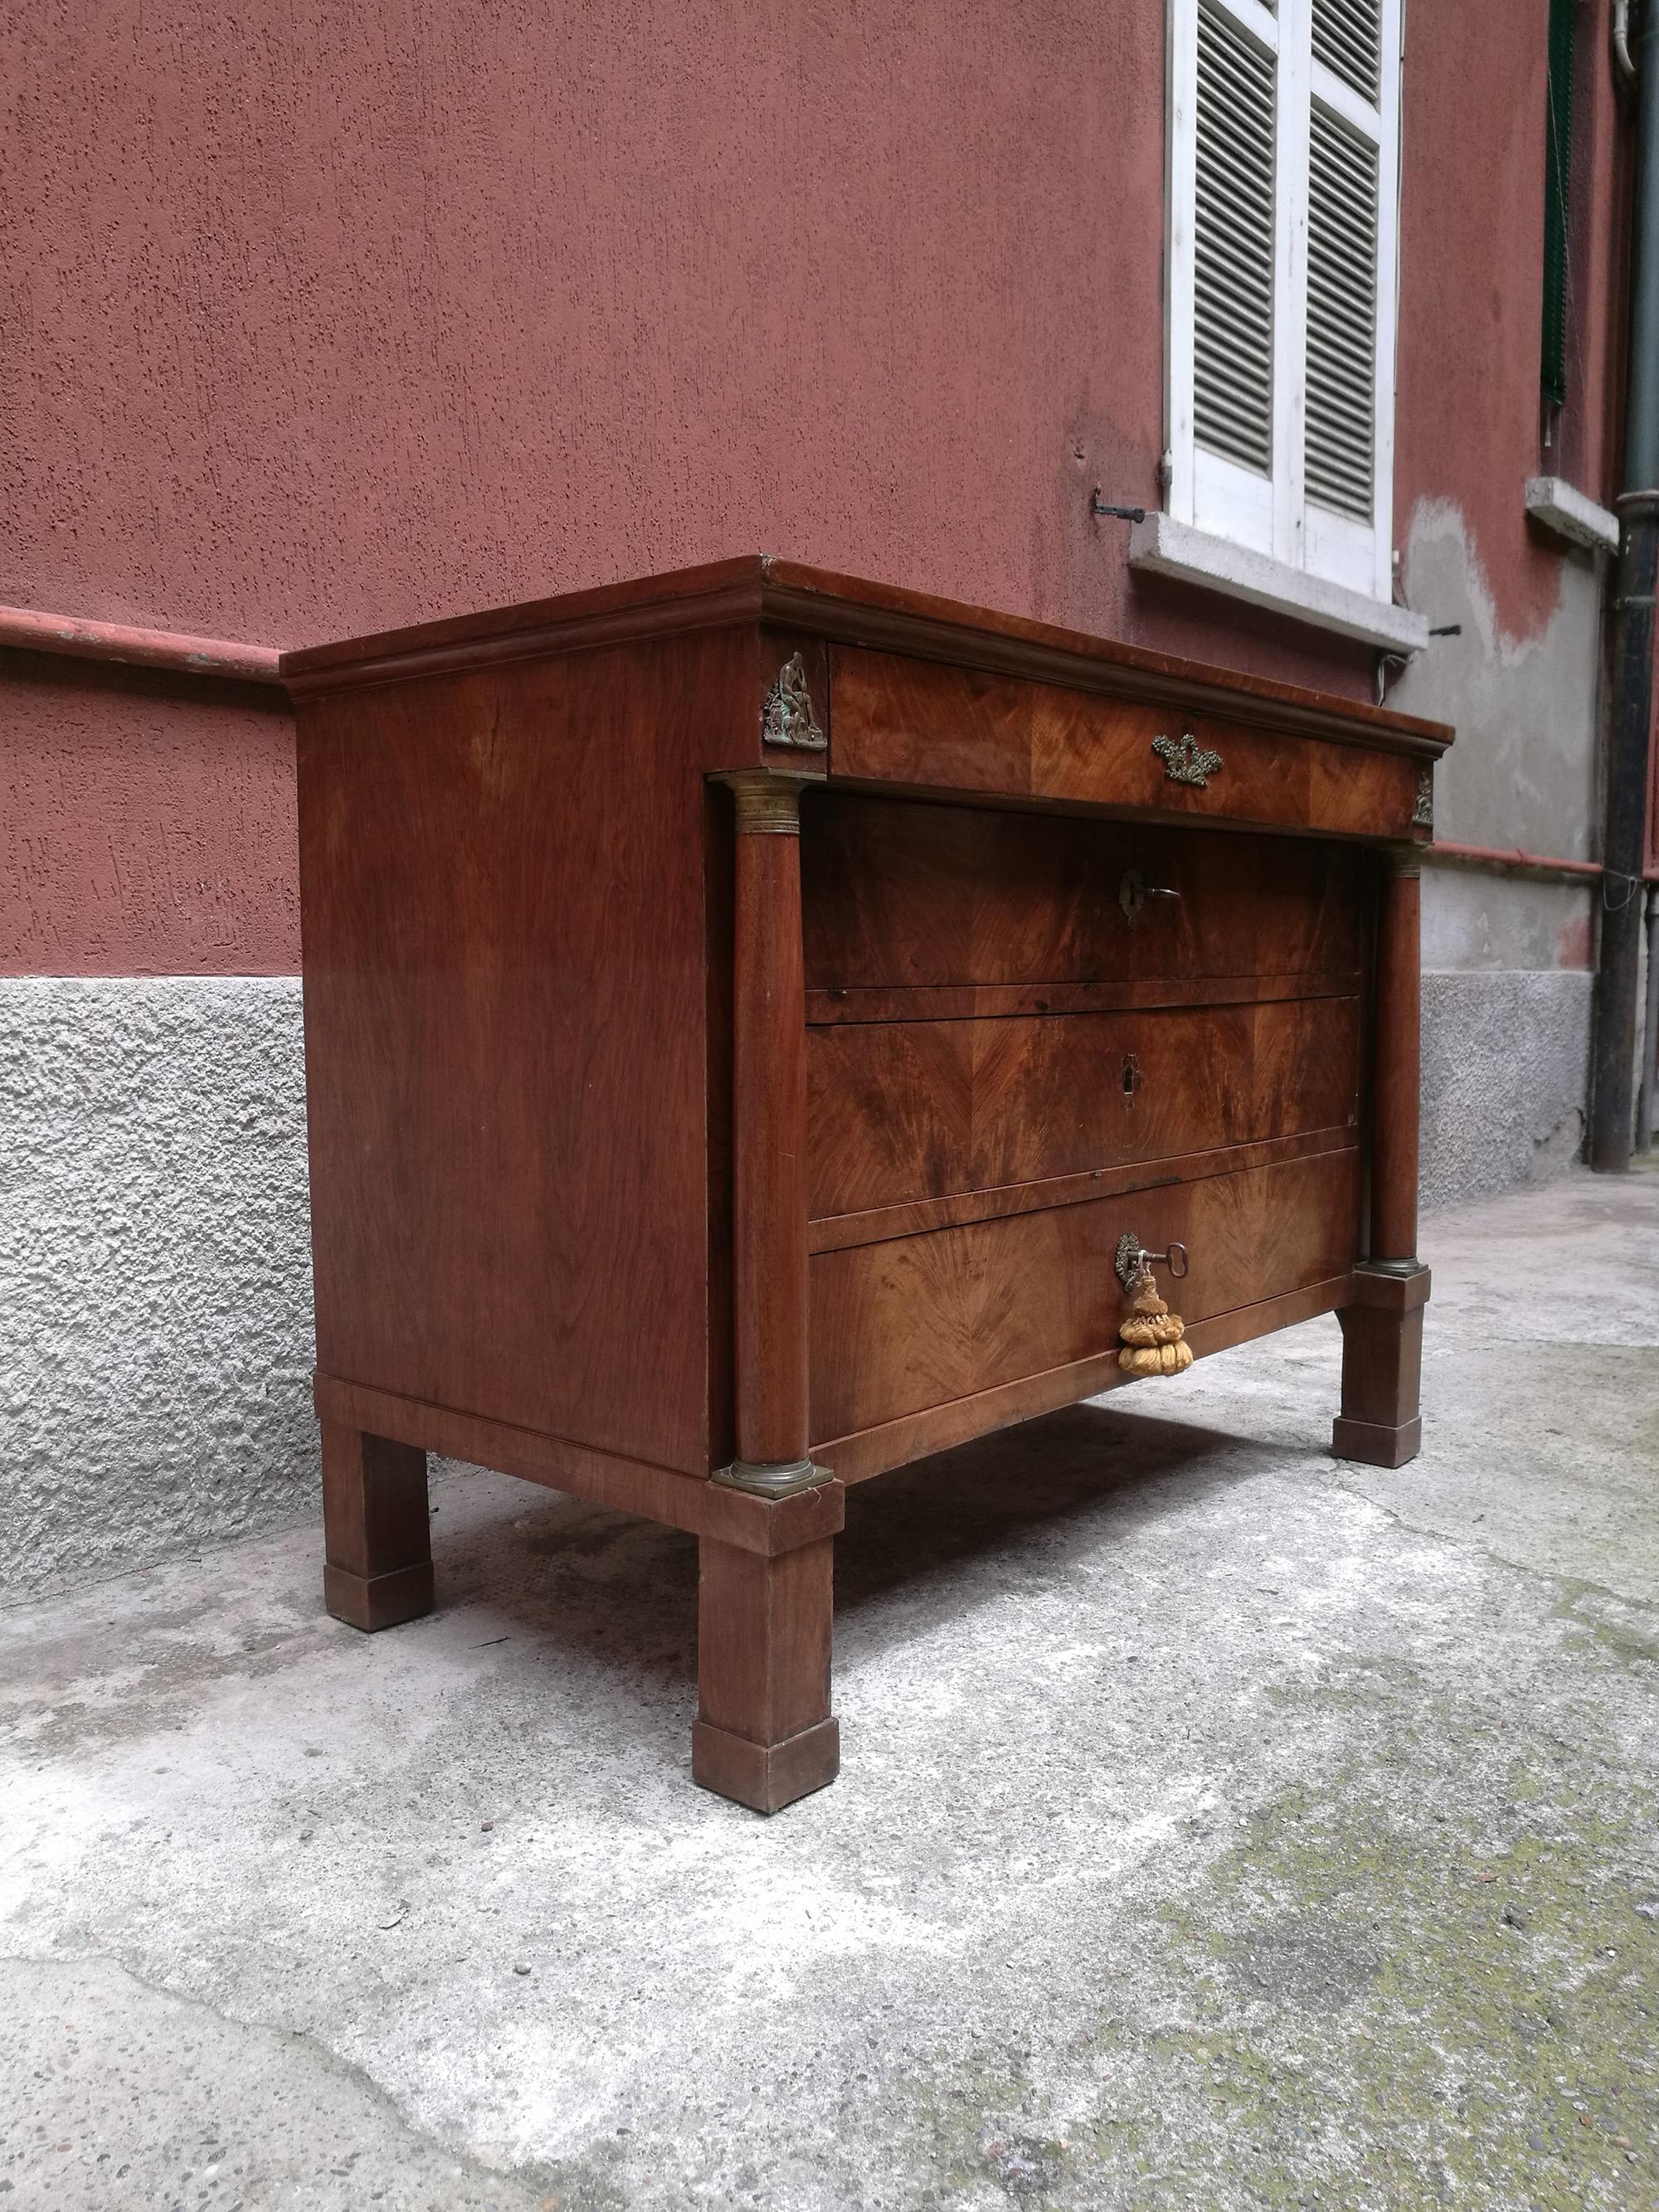 Italian antique wood chest of drawers, 1800s
Chest of drawers in wood with drawers with bronze friezes
Empire period.
good condition
59x123x90h cm